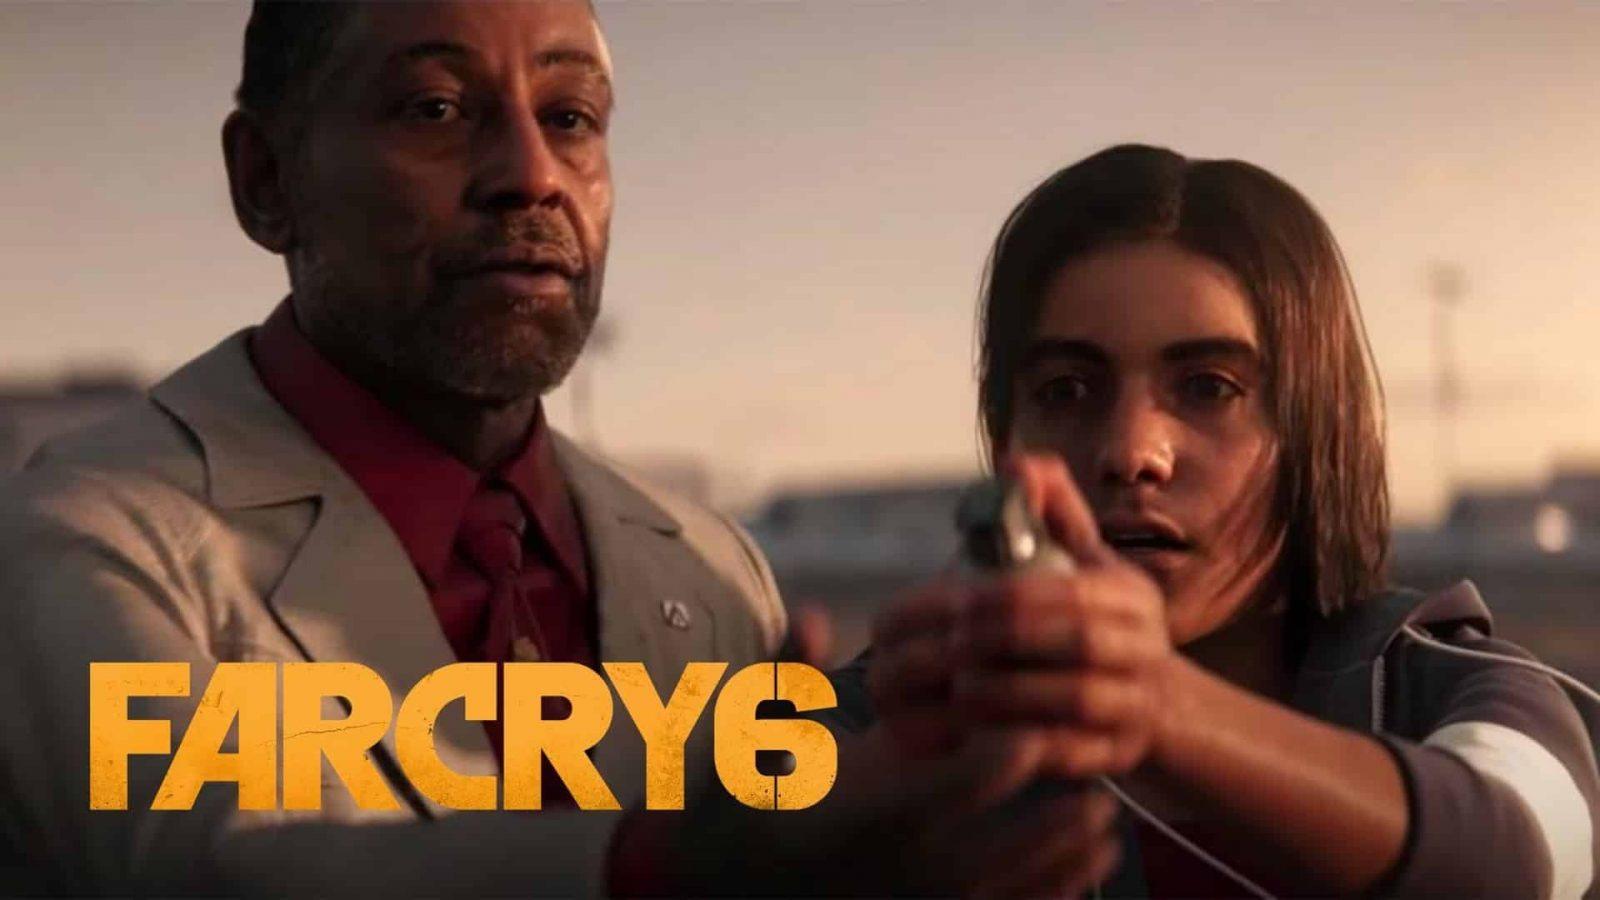 far cry gameplay reveal